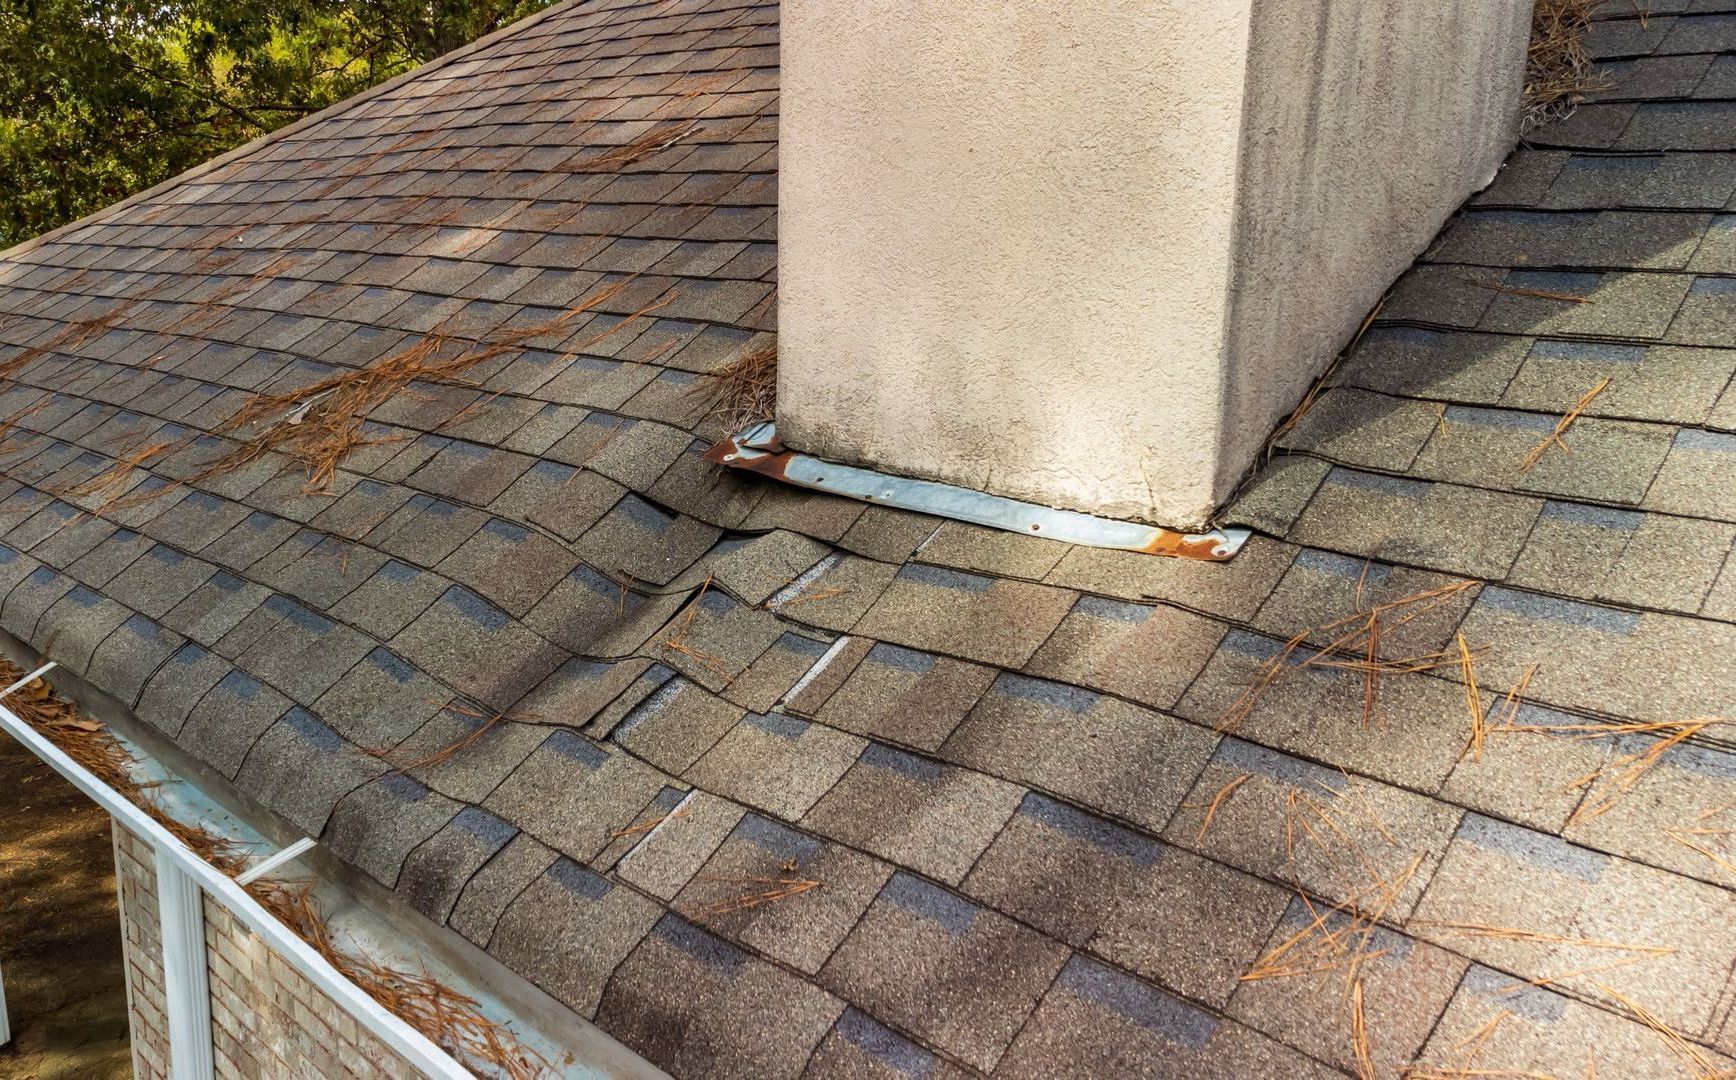 There is a chimney on the roof of a house that needs repair image from Washington Roofing Services near Arlington WA